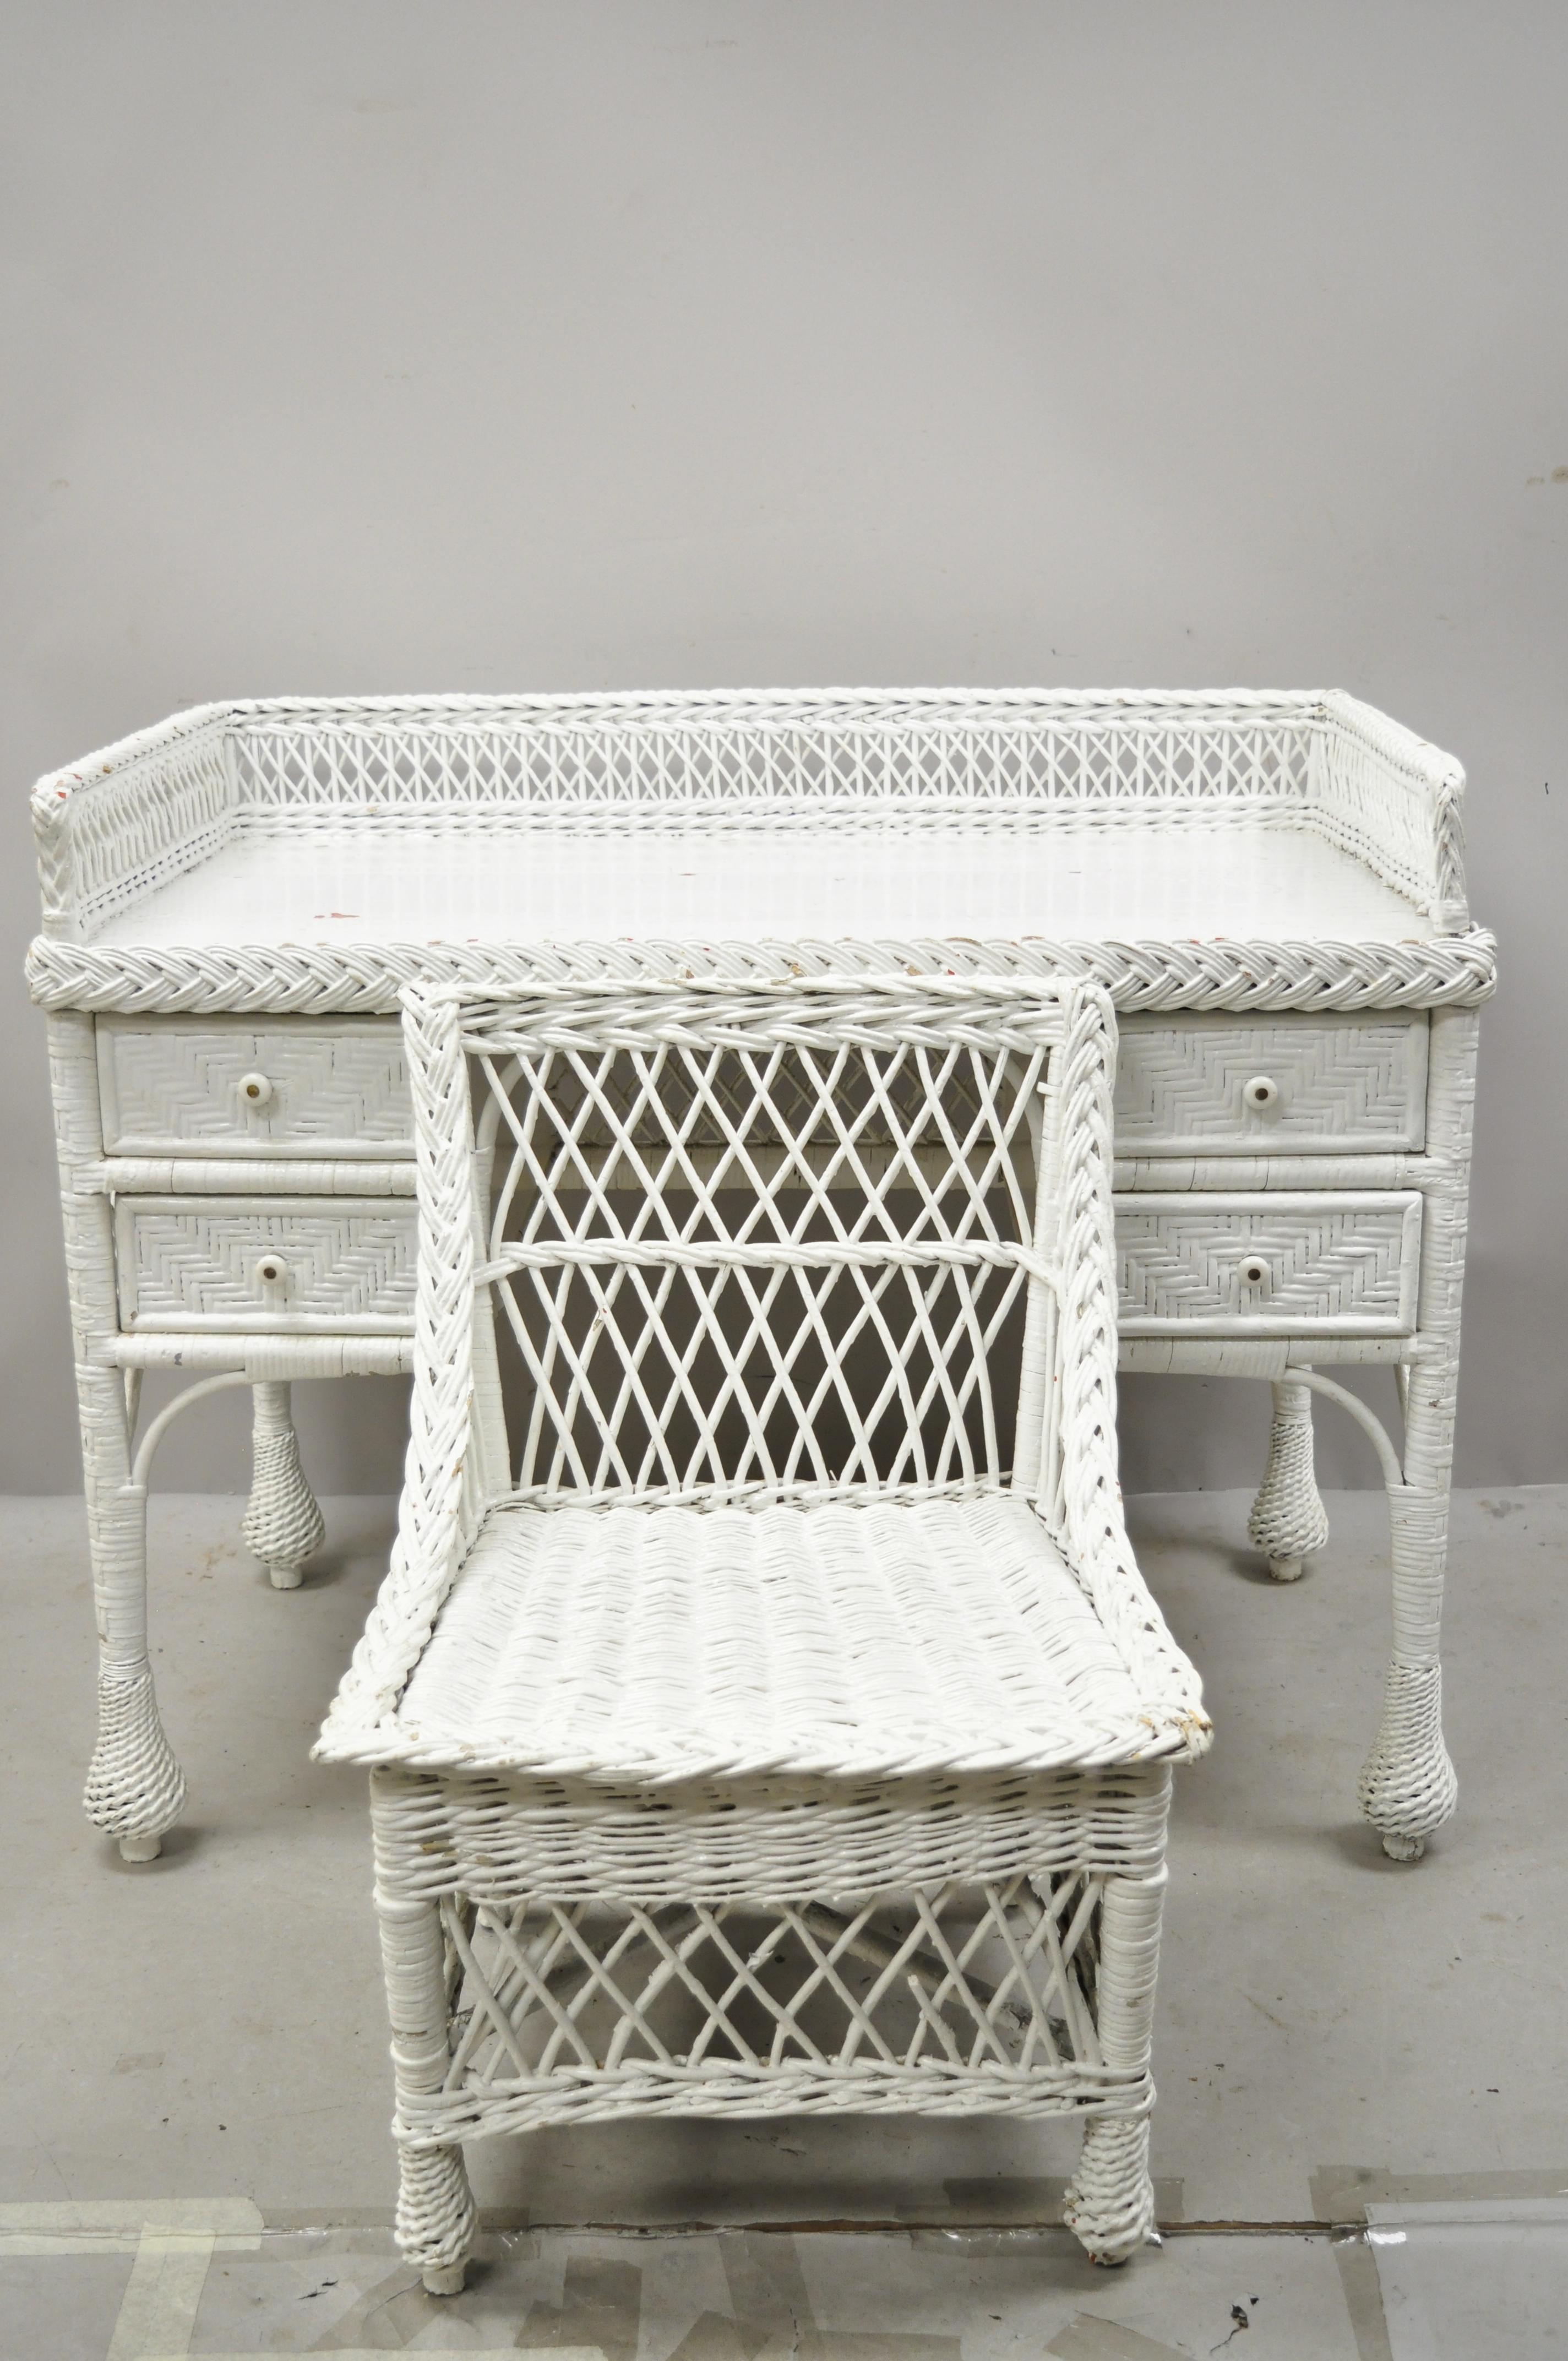 Antique Victorian style white wicker vanity desk with drawers and chair set. Item features (1) desk/vanity, (1) small chair, white painted finish, very nice vintage set, quality American craftsmanship, great style and form, circa mid-late 20th